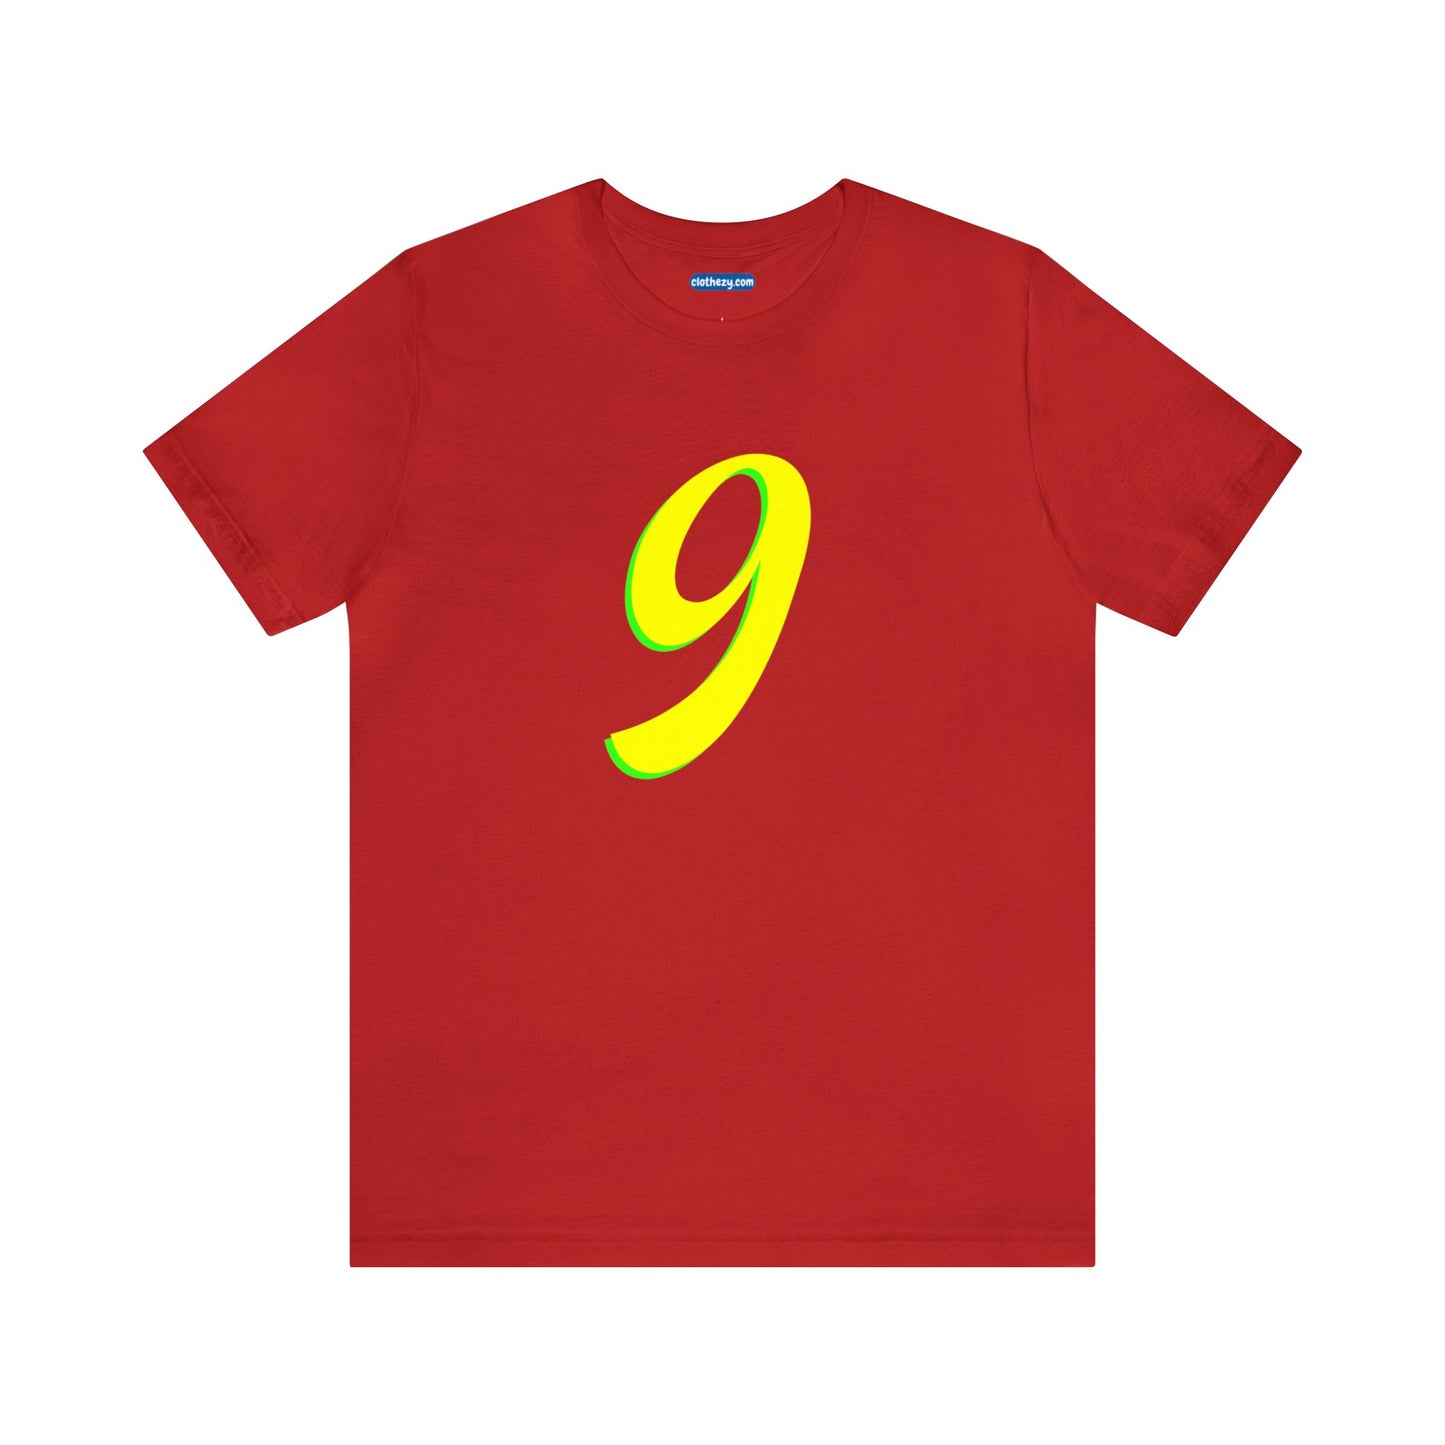 Number 9 Design - Soft Cotton Tee for birthdays and celebrations, Gift for friends and family, Multiple Options by clothezy.com in Red Size Small - Buy Now